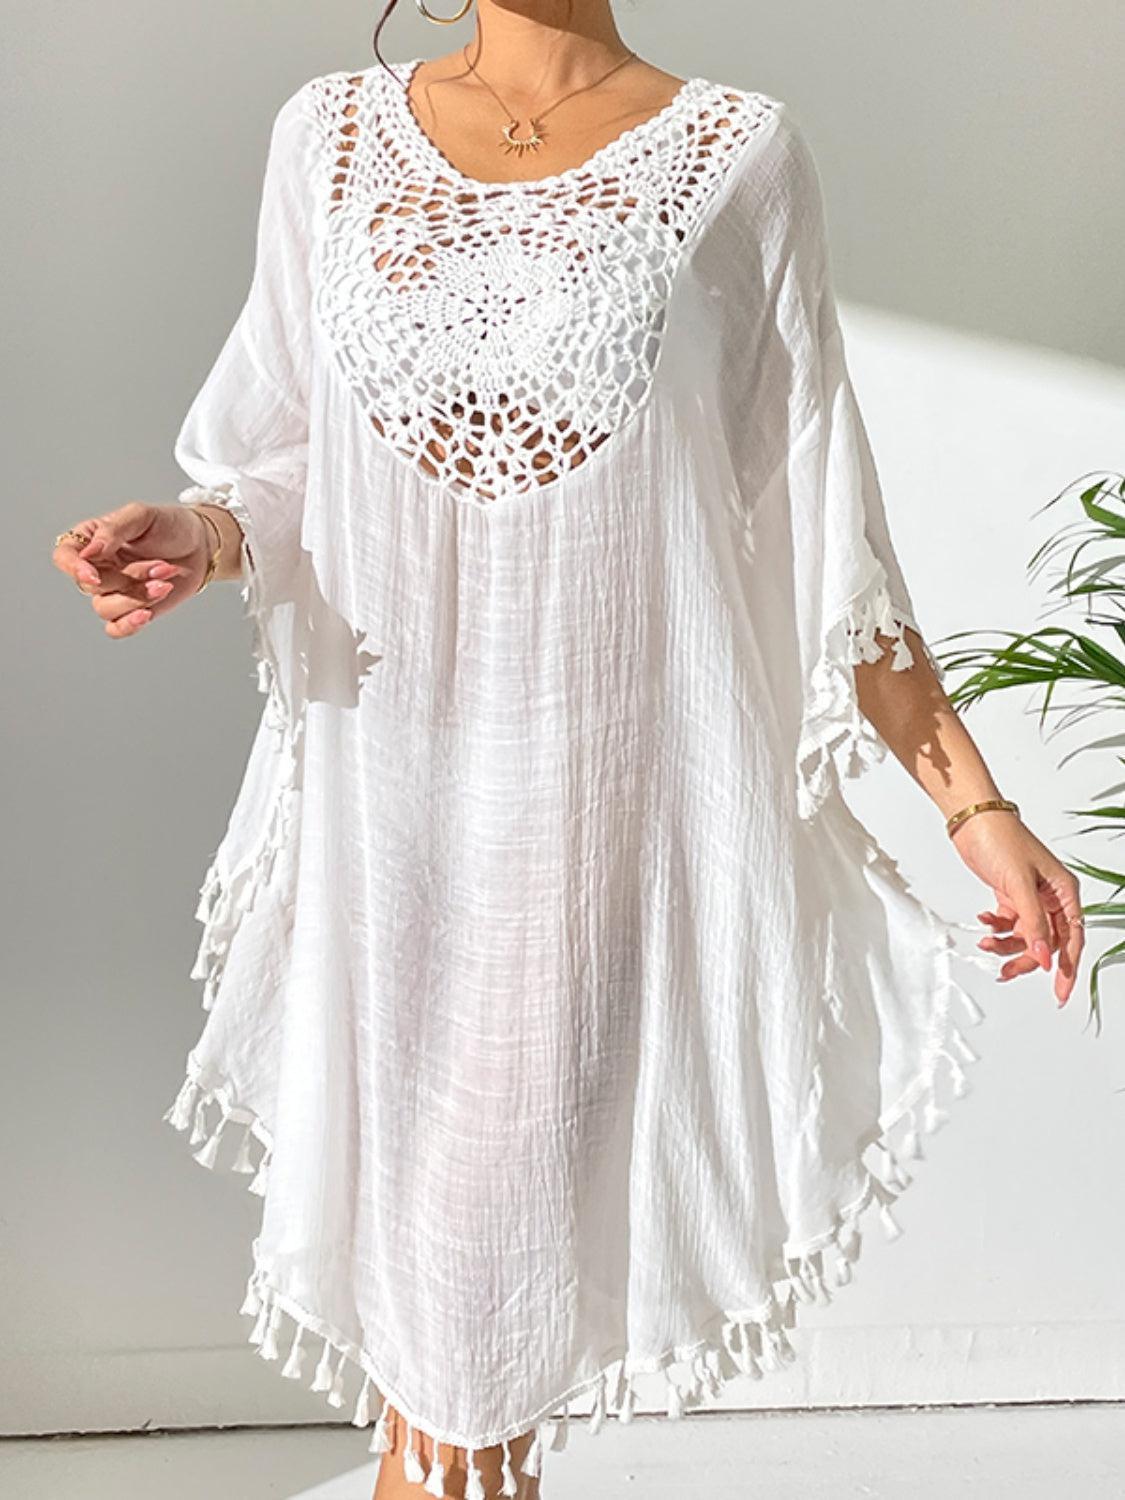 a woman wearing a white crochet cover up